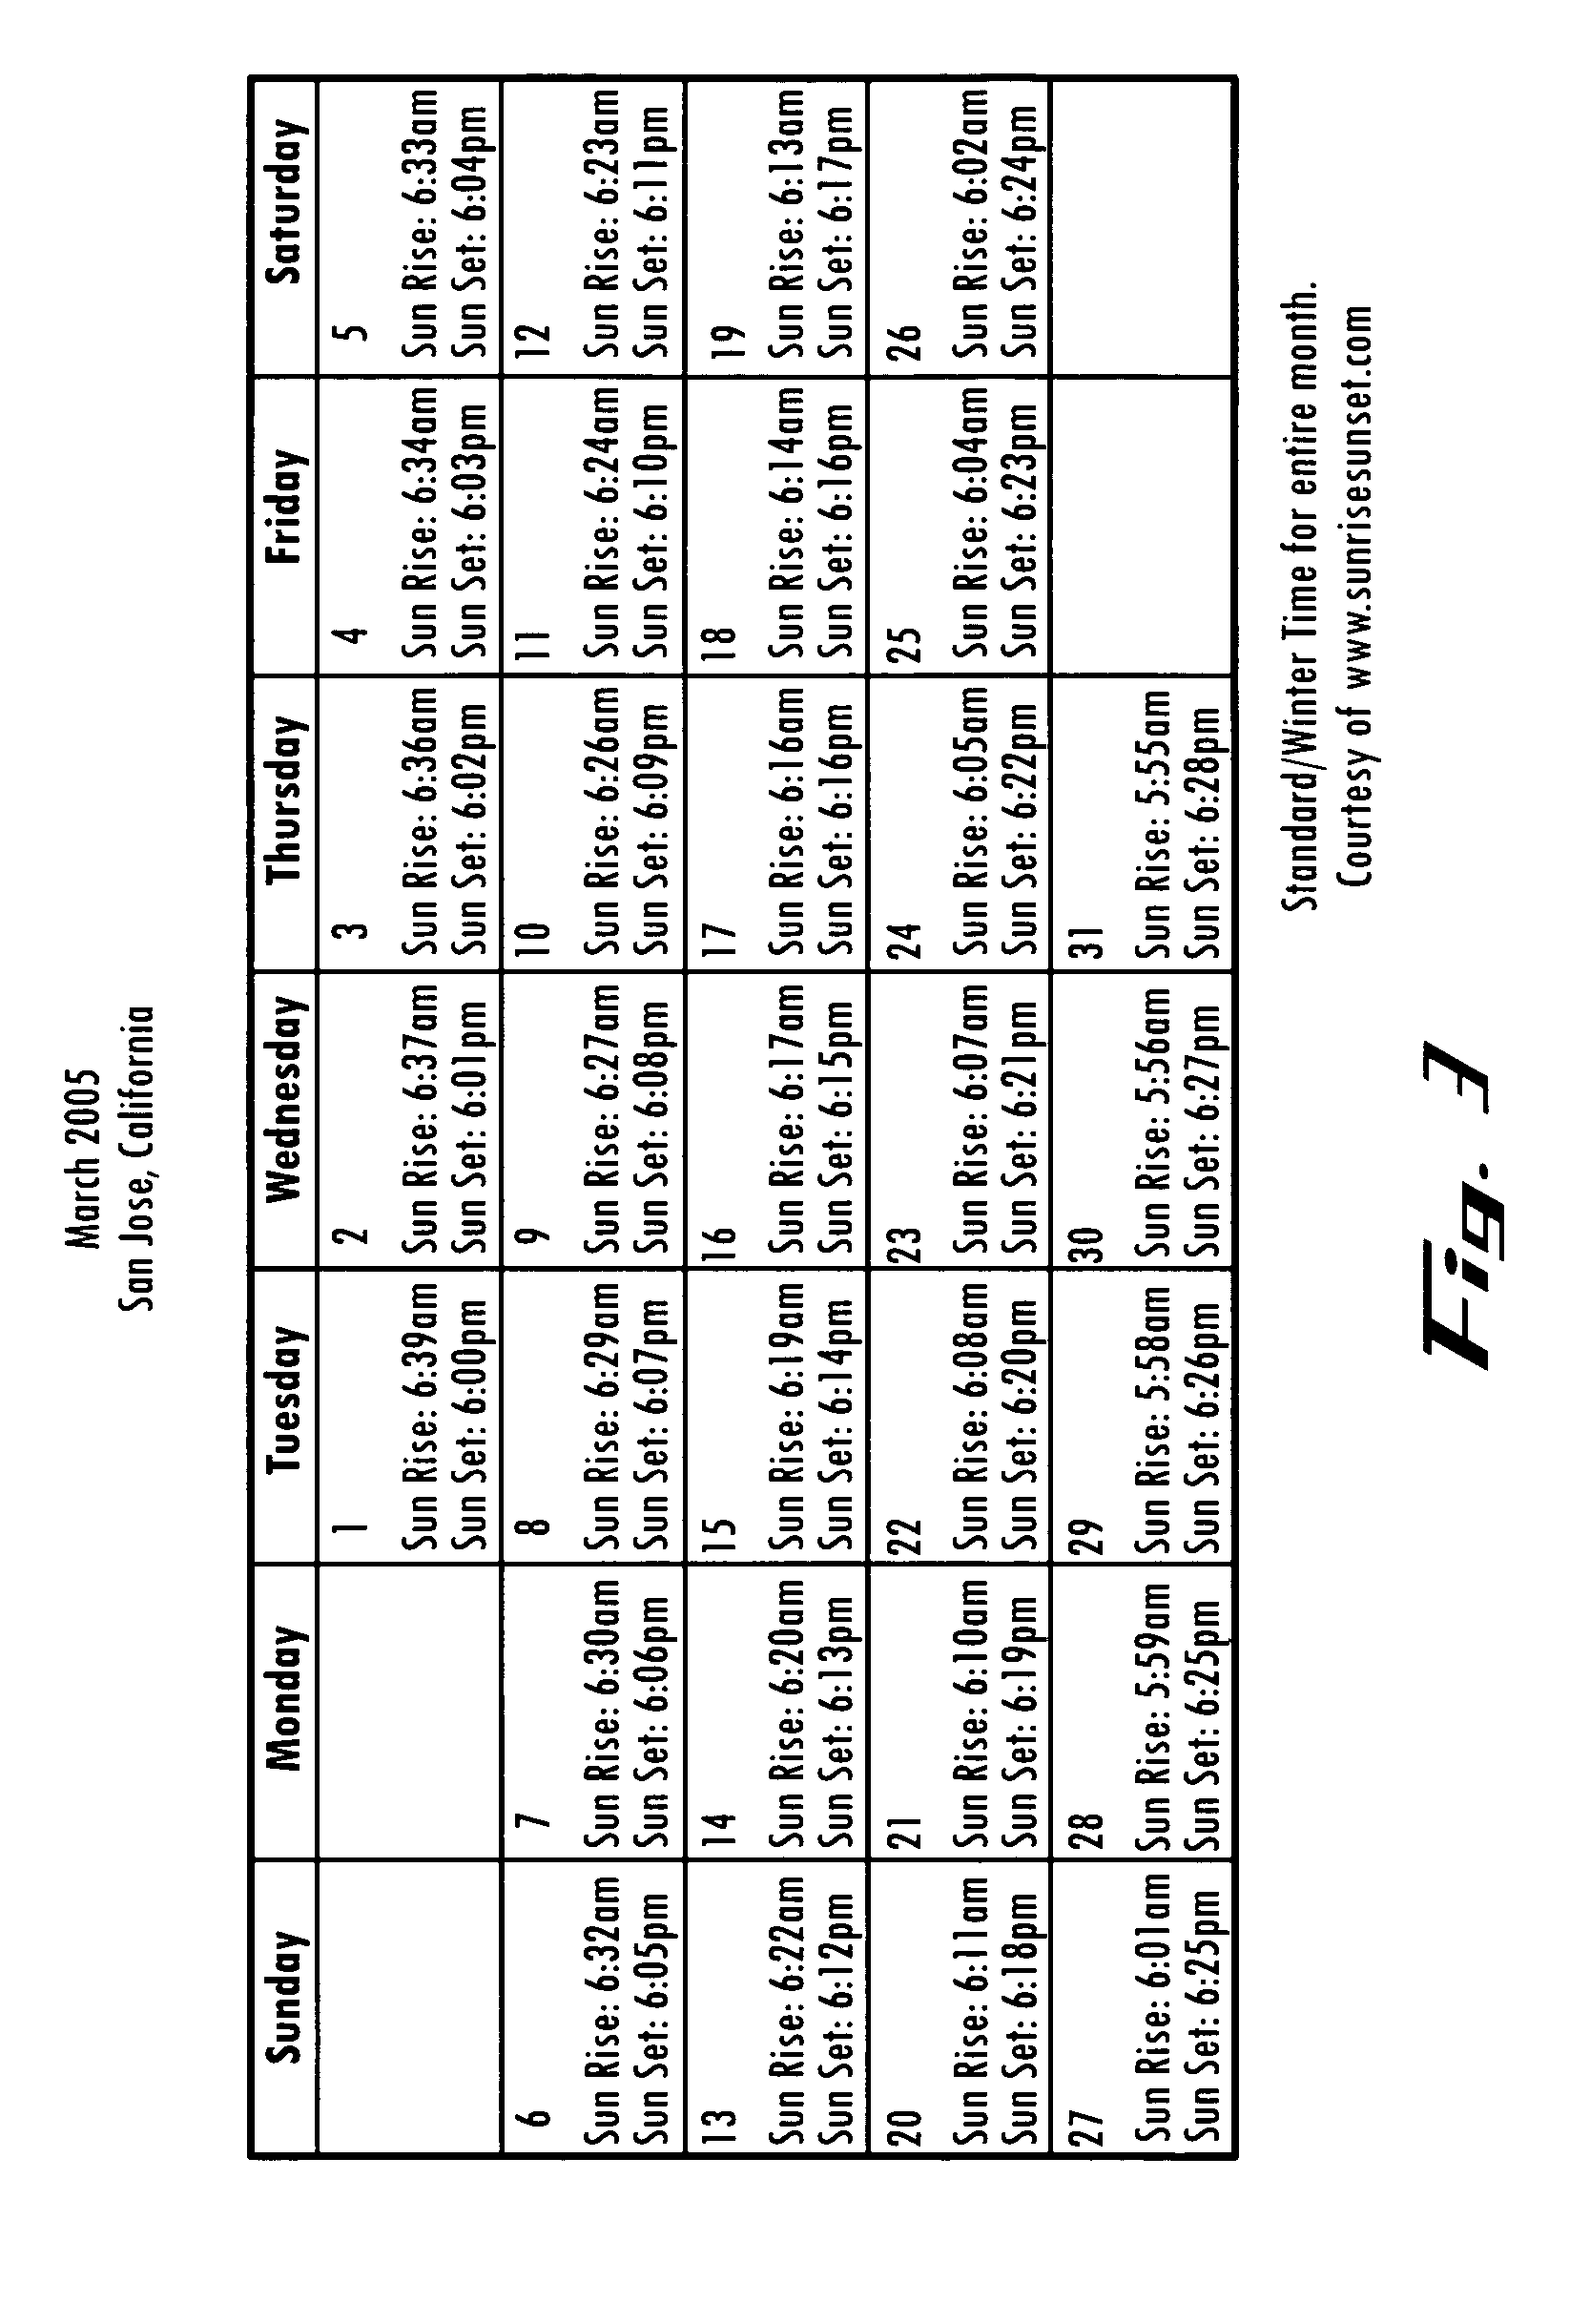 Image-enhanced vehicle navigation systems and methods